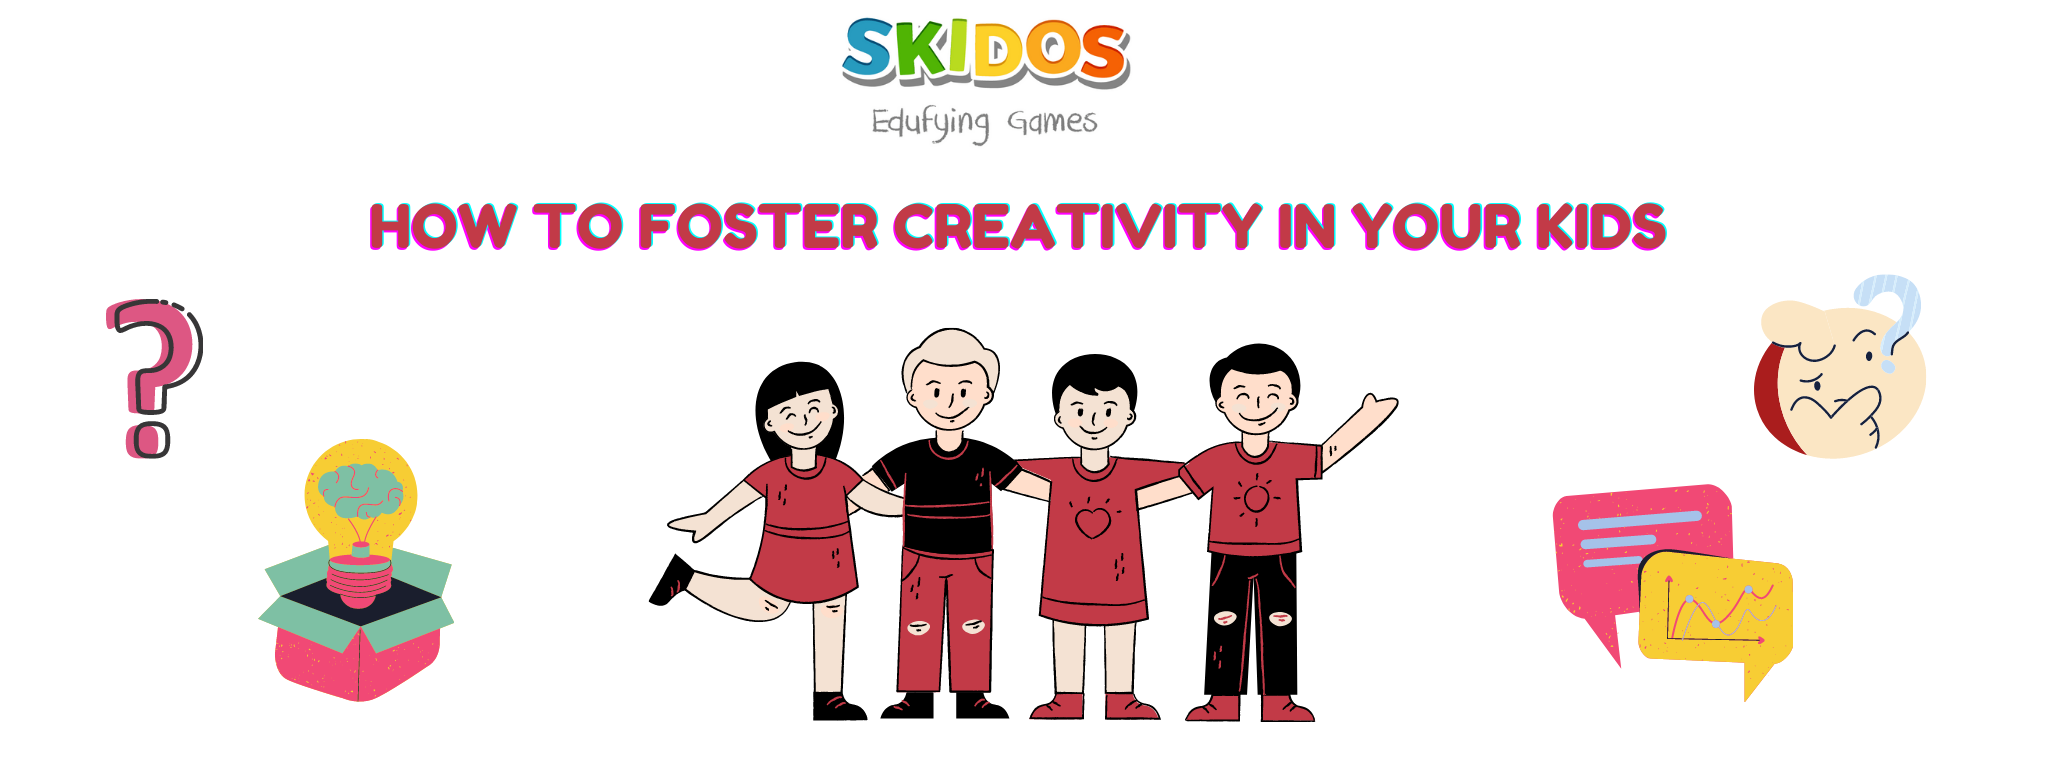 HOW to Foster Creativity in Your Kids